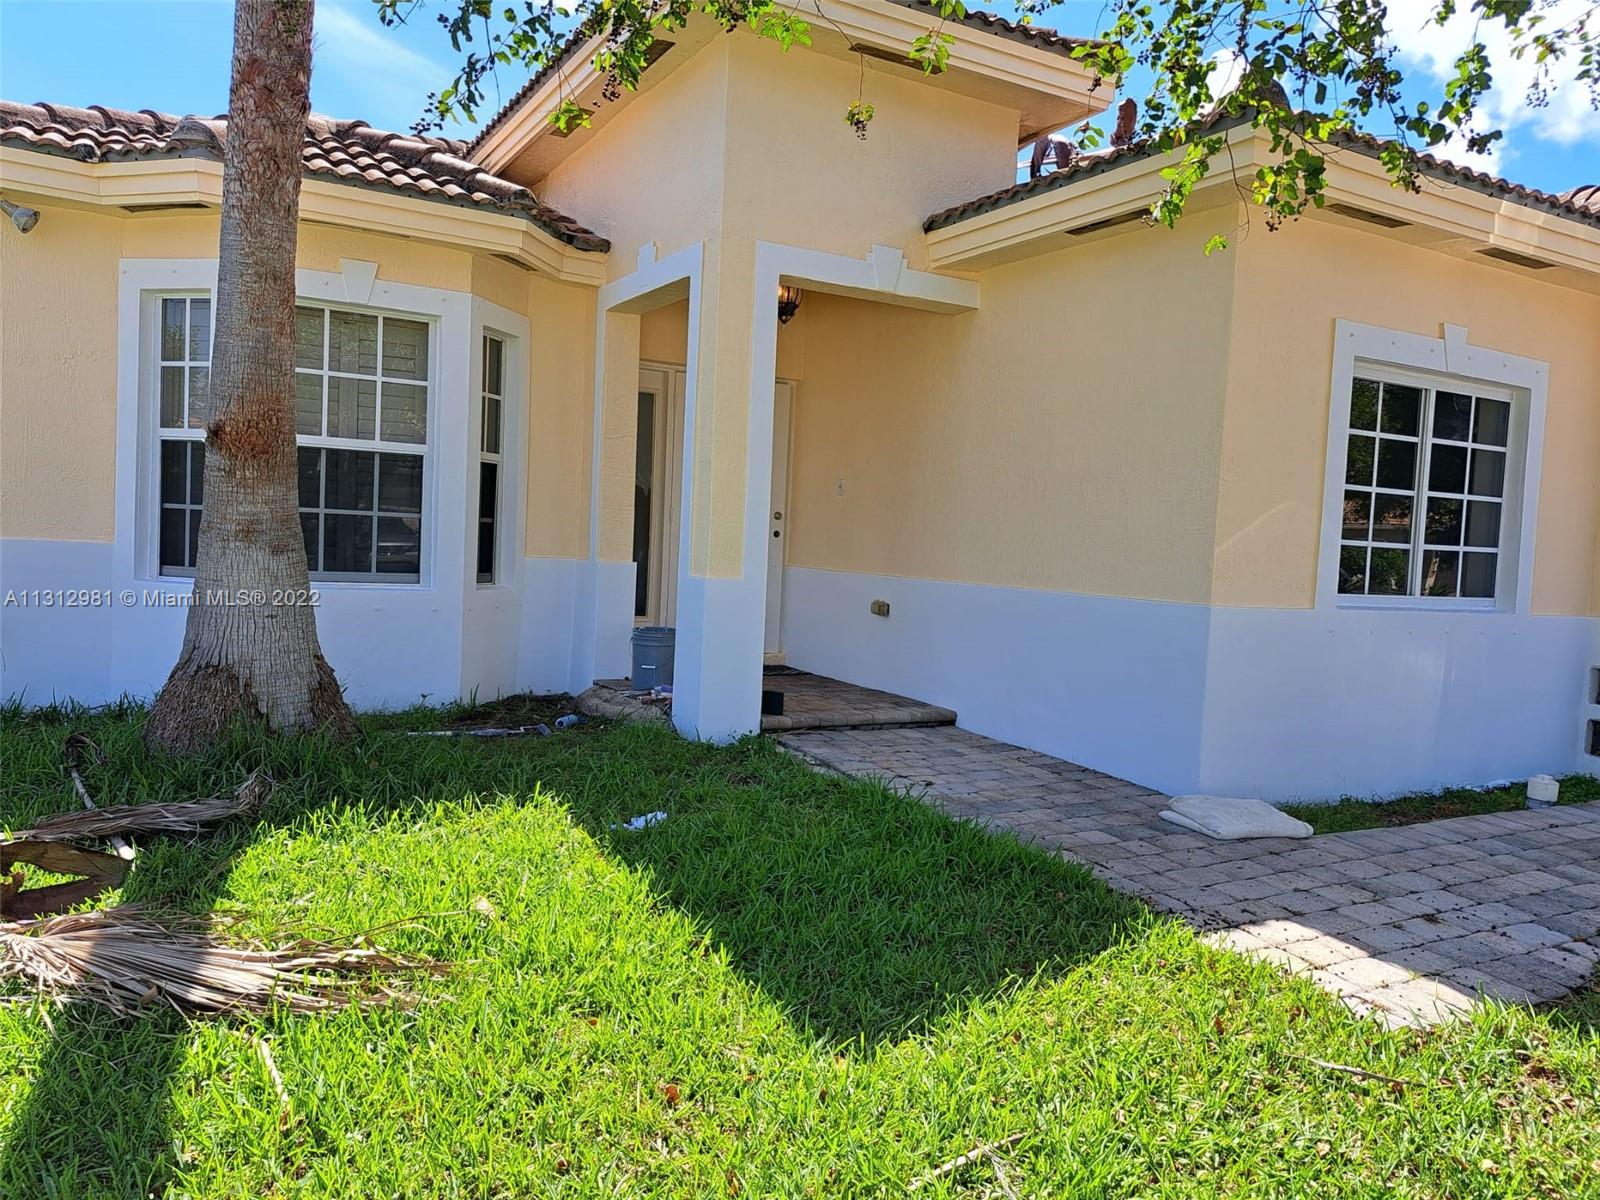 AS-IS. Remodeled 3/2 Single family home in Cuttler Bay, one of the cities with the lowest crime rate in the state. Large corner lot in PELICAN BAY, one of the most sought-after communities in Cutler Bay, especially for those who are looking to pay low monthly HOA fees. Ample living room. Concrete structure to withstand any weather conditions. Best public & private schools in the area. Close to shopping, dining, to Black Point Marina and the beach. This is a MUST SEE. Hurry, won’t last.